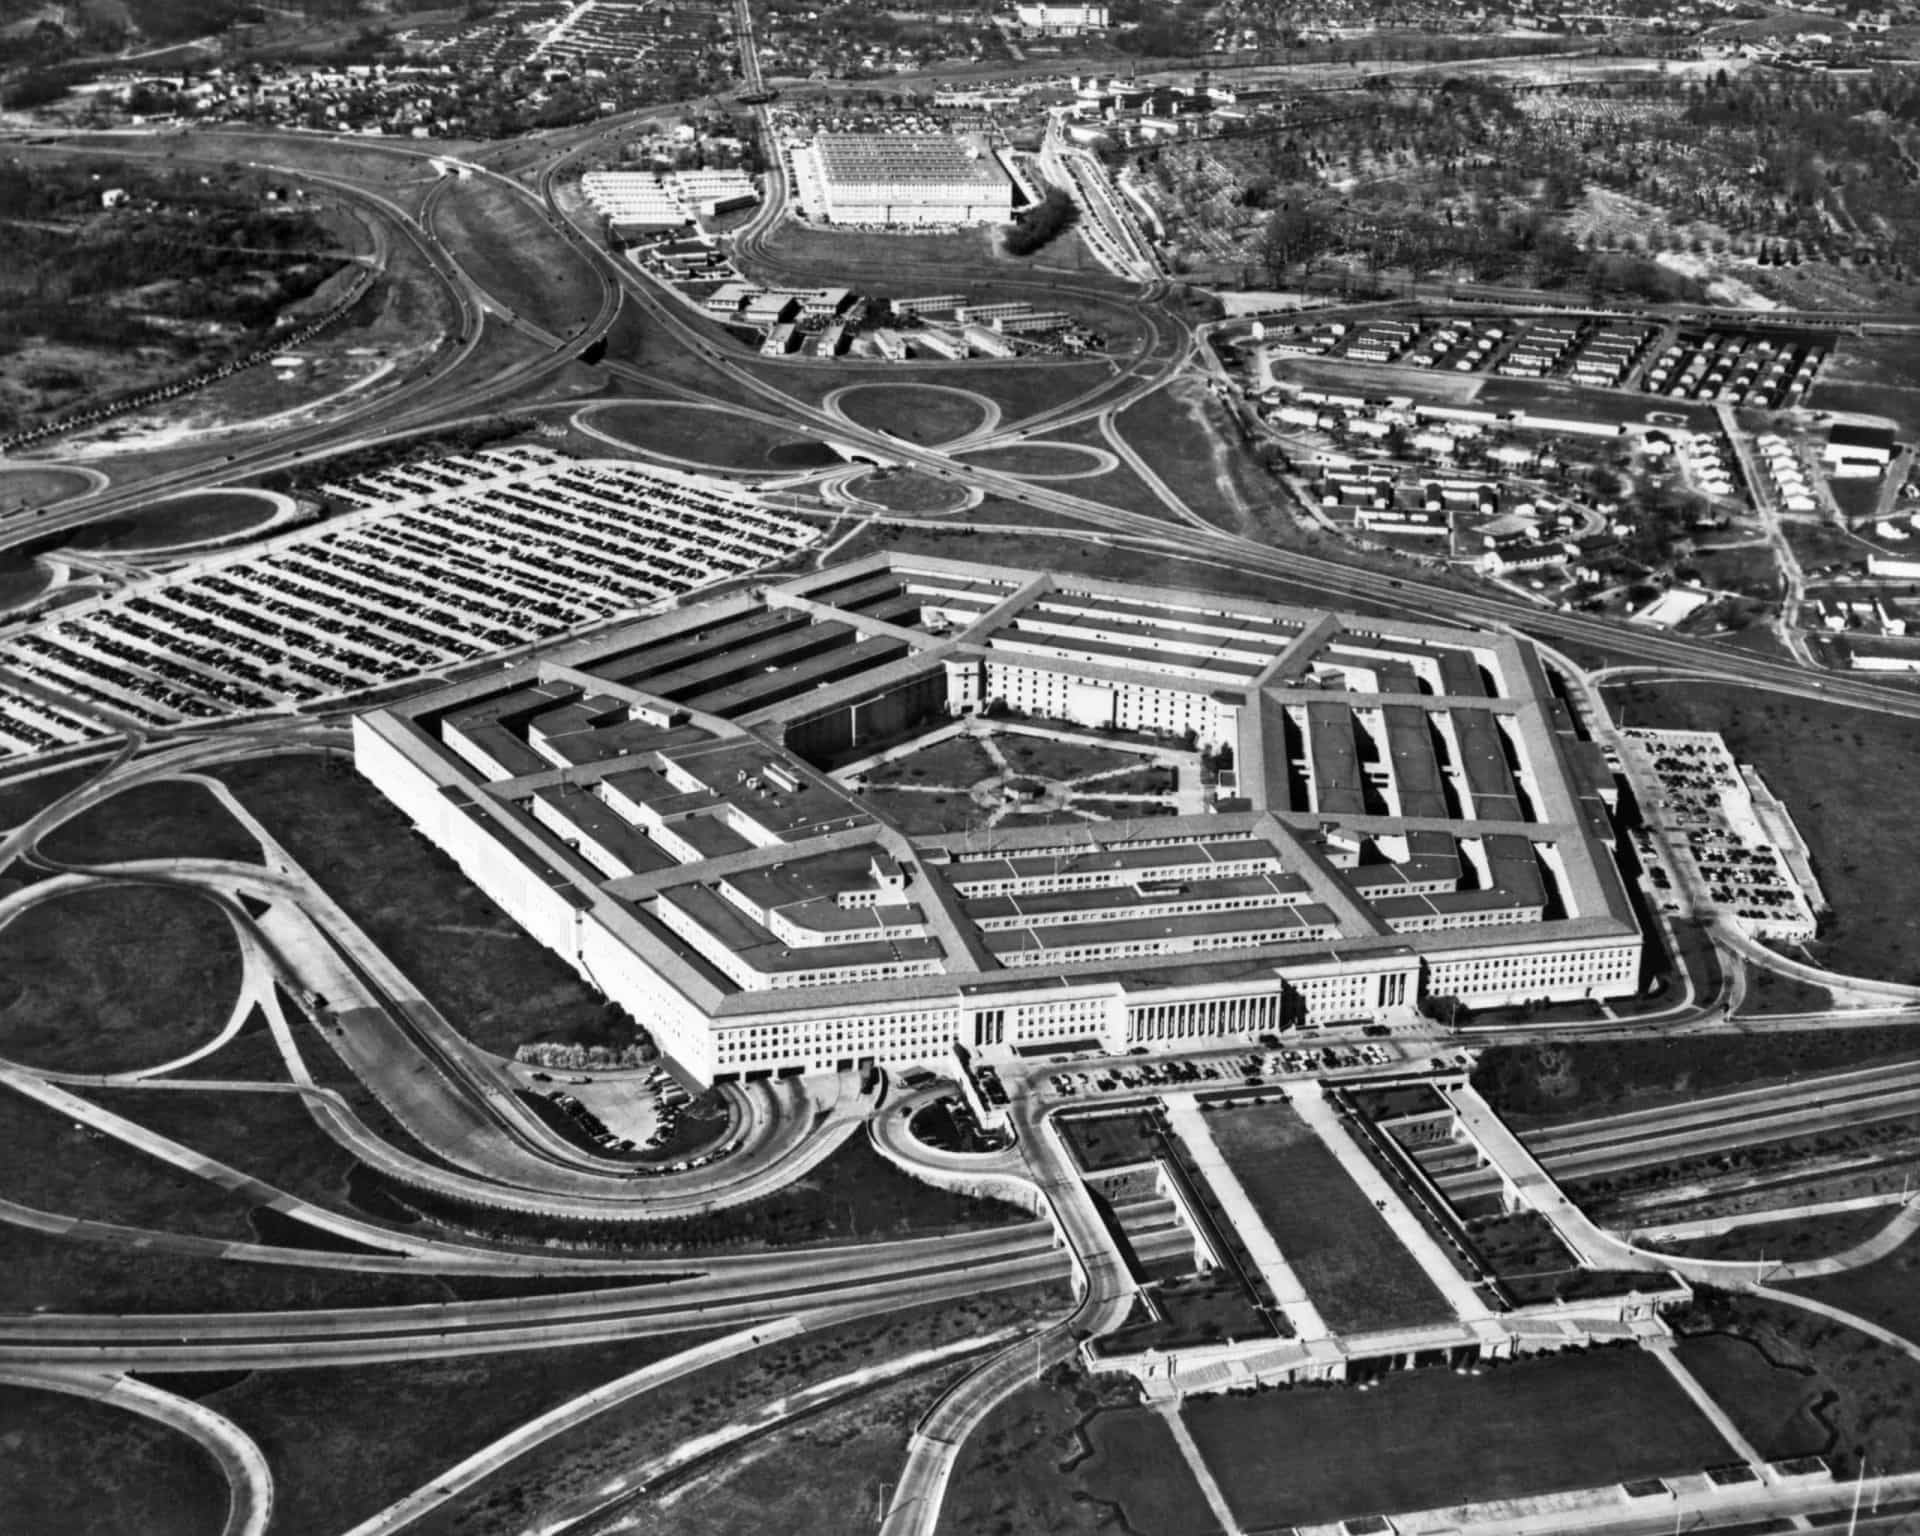 <p>Named for its five sides, the Pentagon is the world's largest office building. It occupies 150 acres (6.5 million square feet) of floor space.</p>